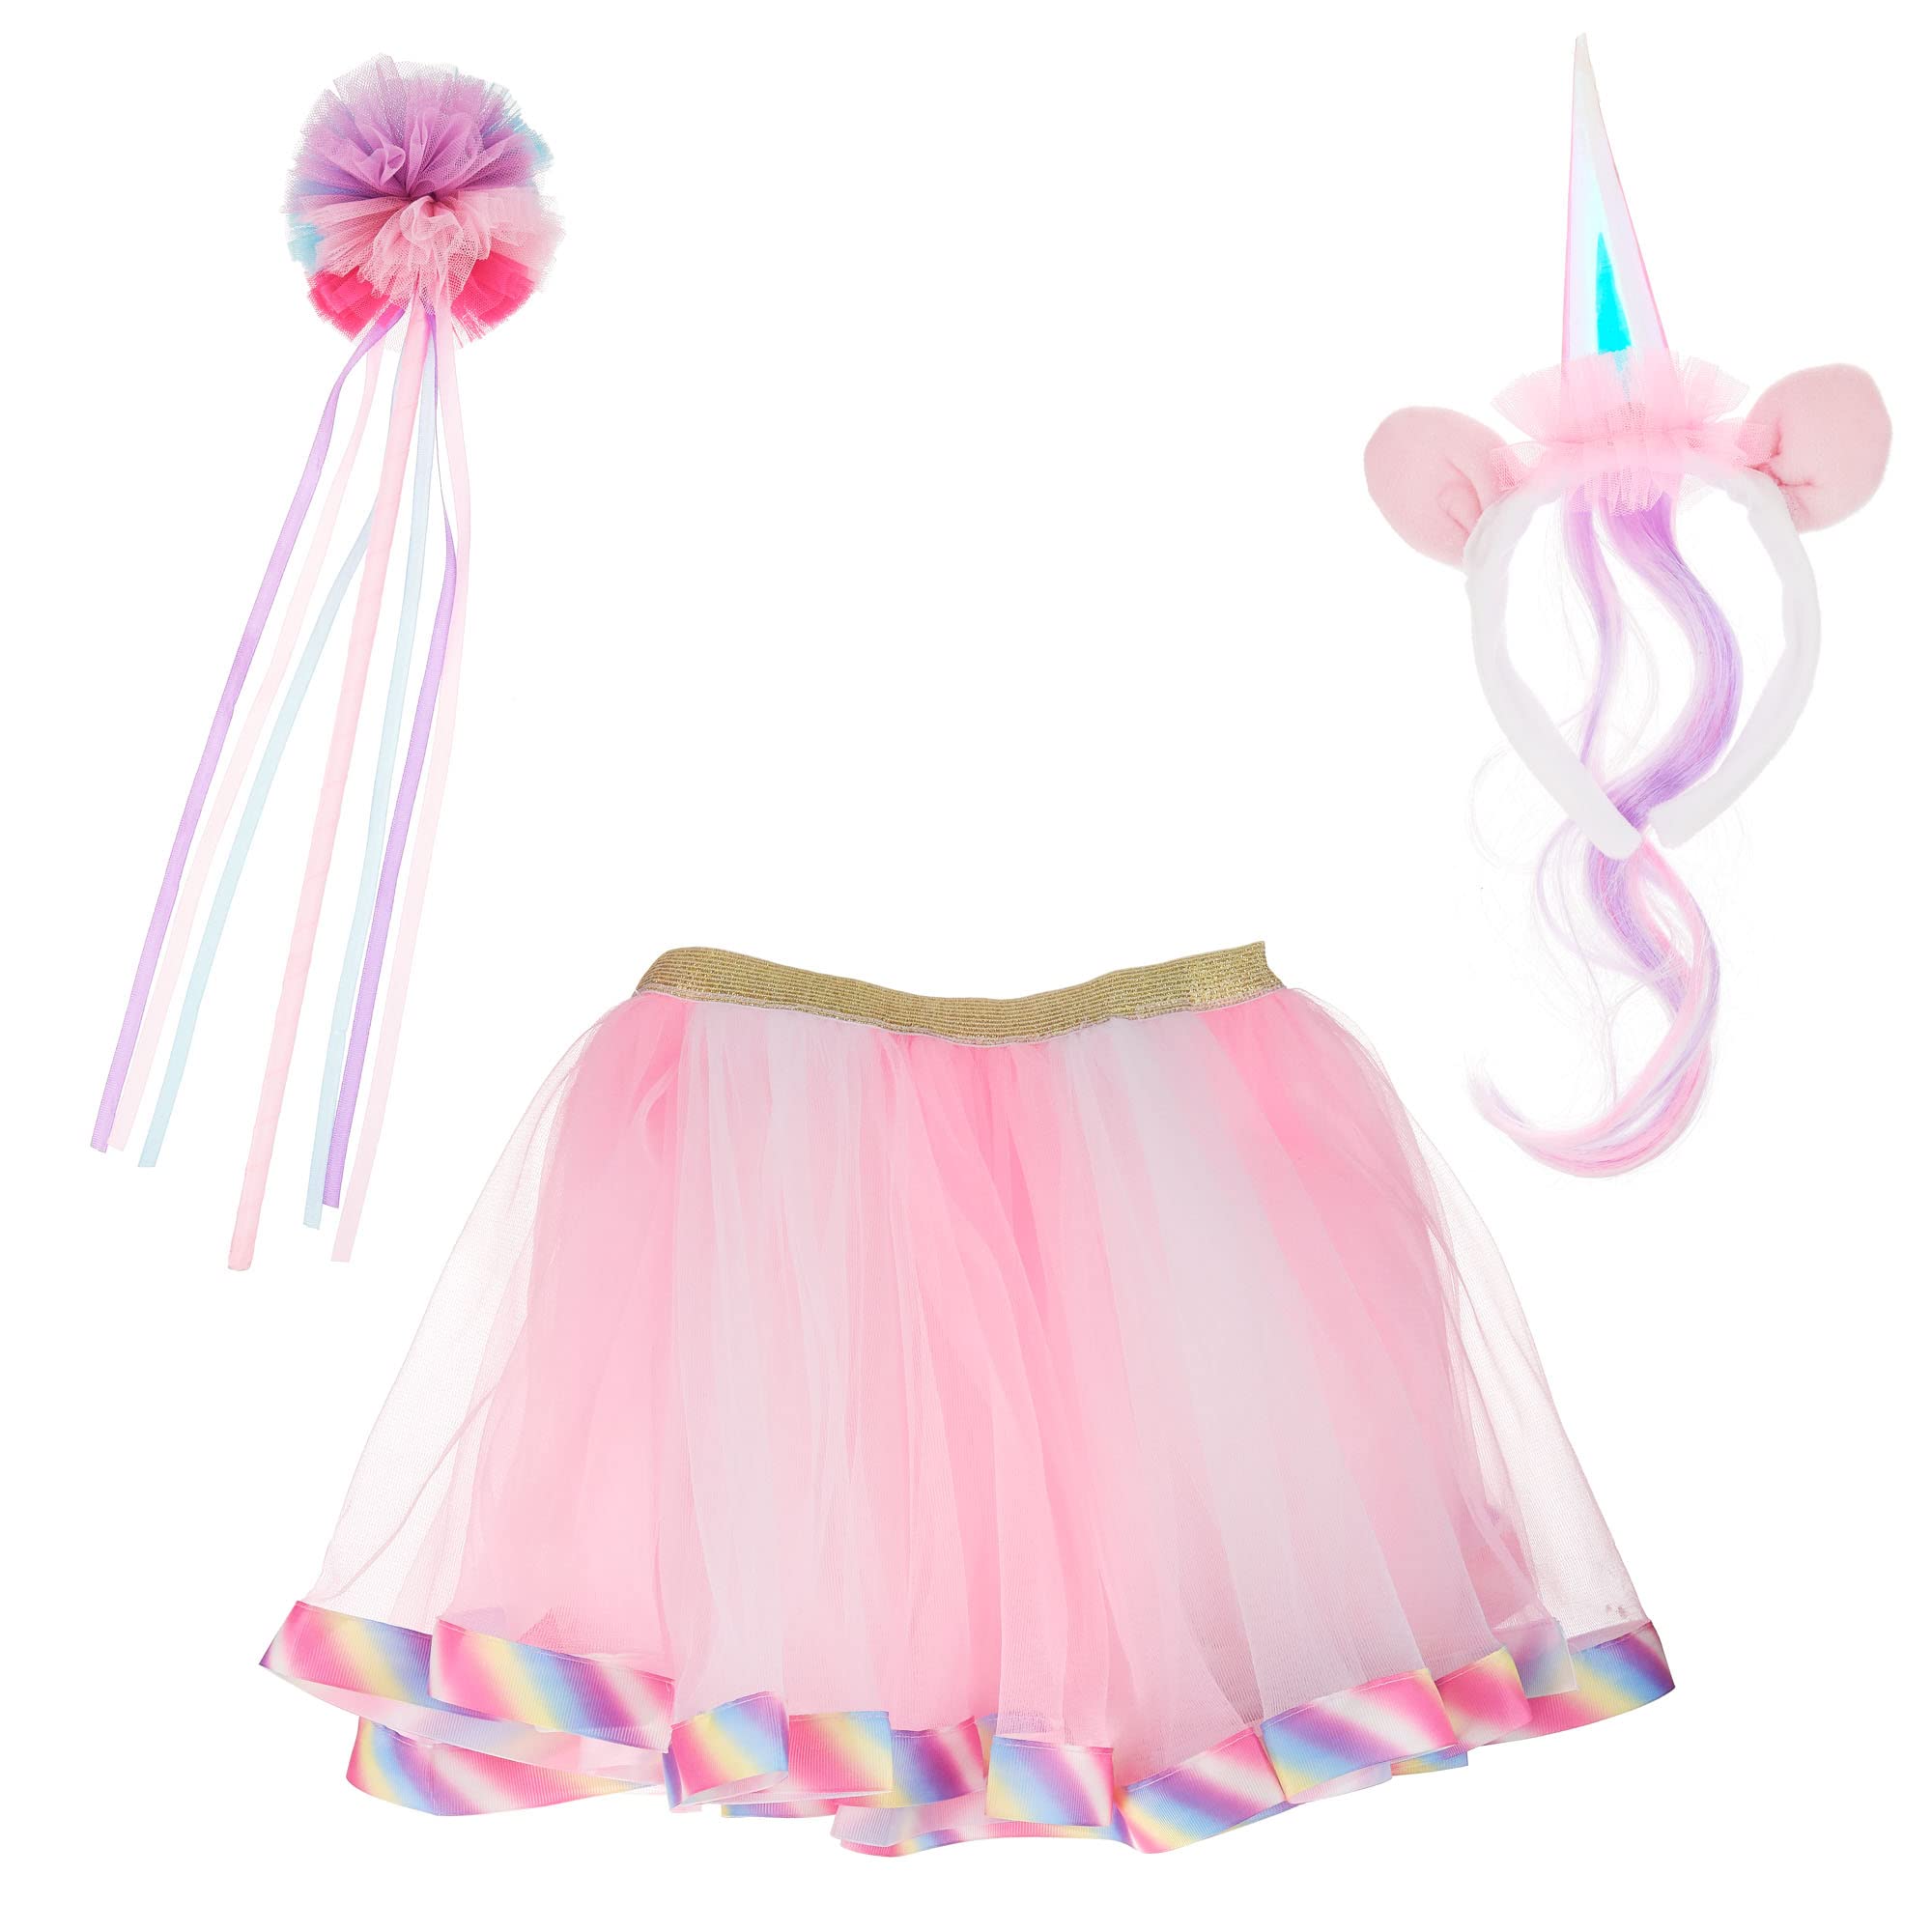 Expressions – Unicorn Princess Dress Up Set – 3 PC Play Costume ,Party Role Play Dress up, Party ,Perfect for kids princess birthday gift,Disney cruise ,